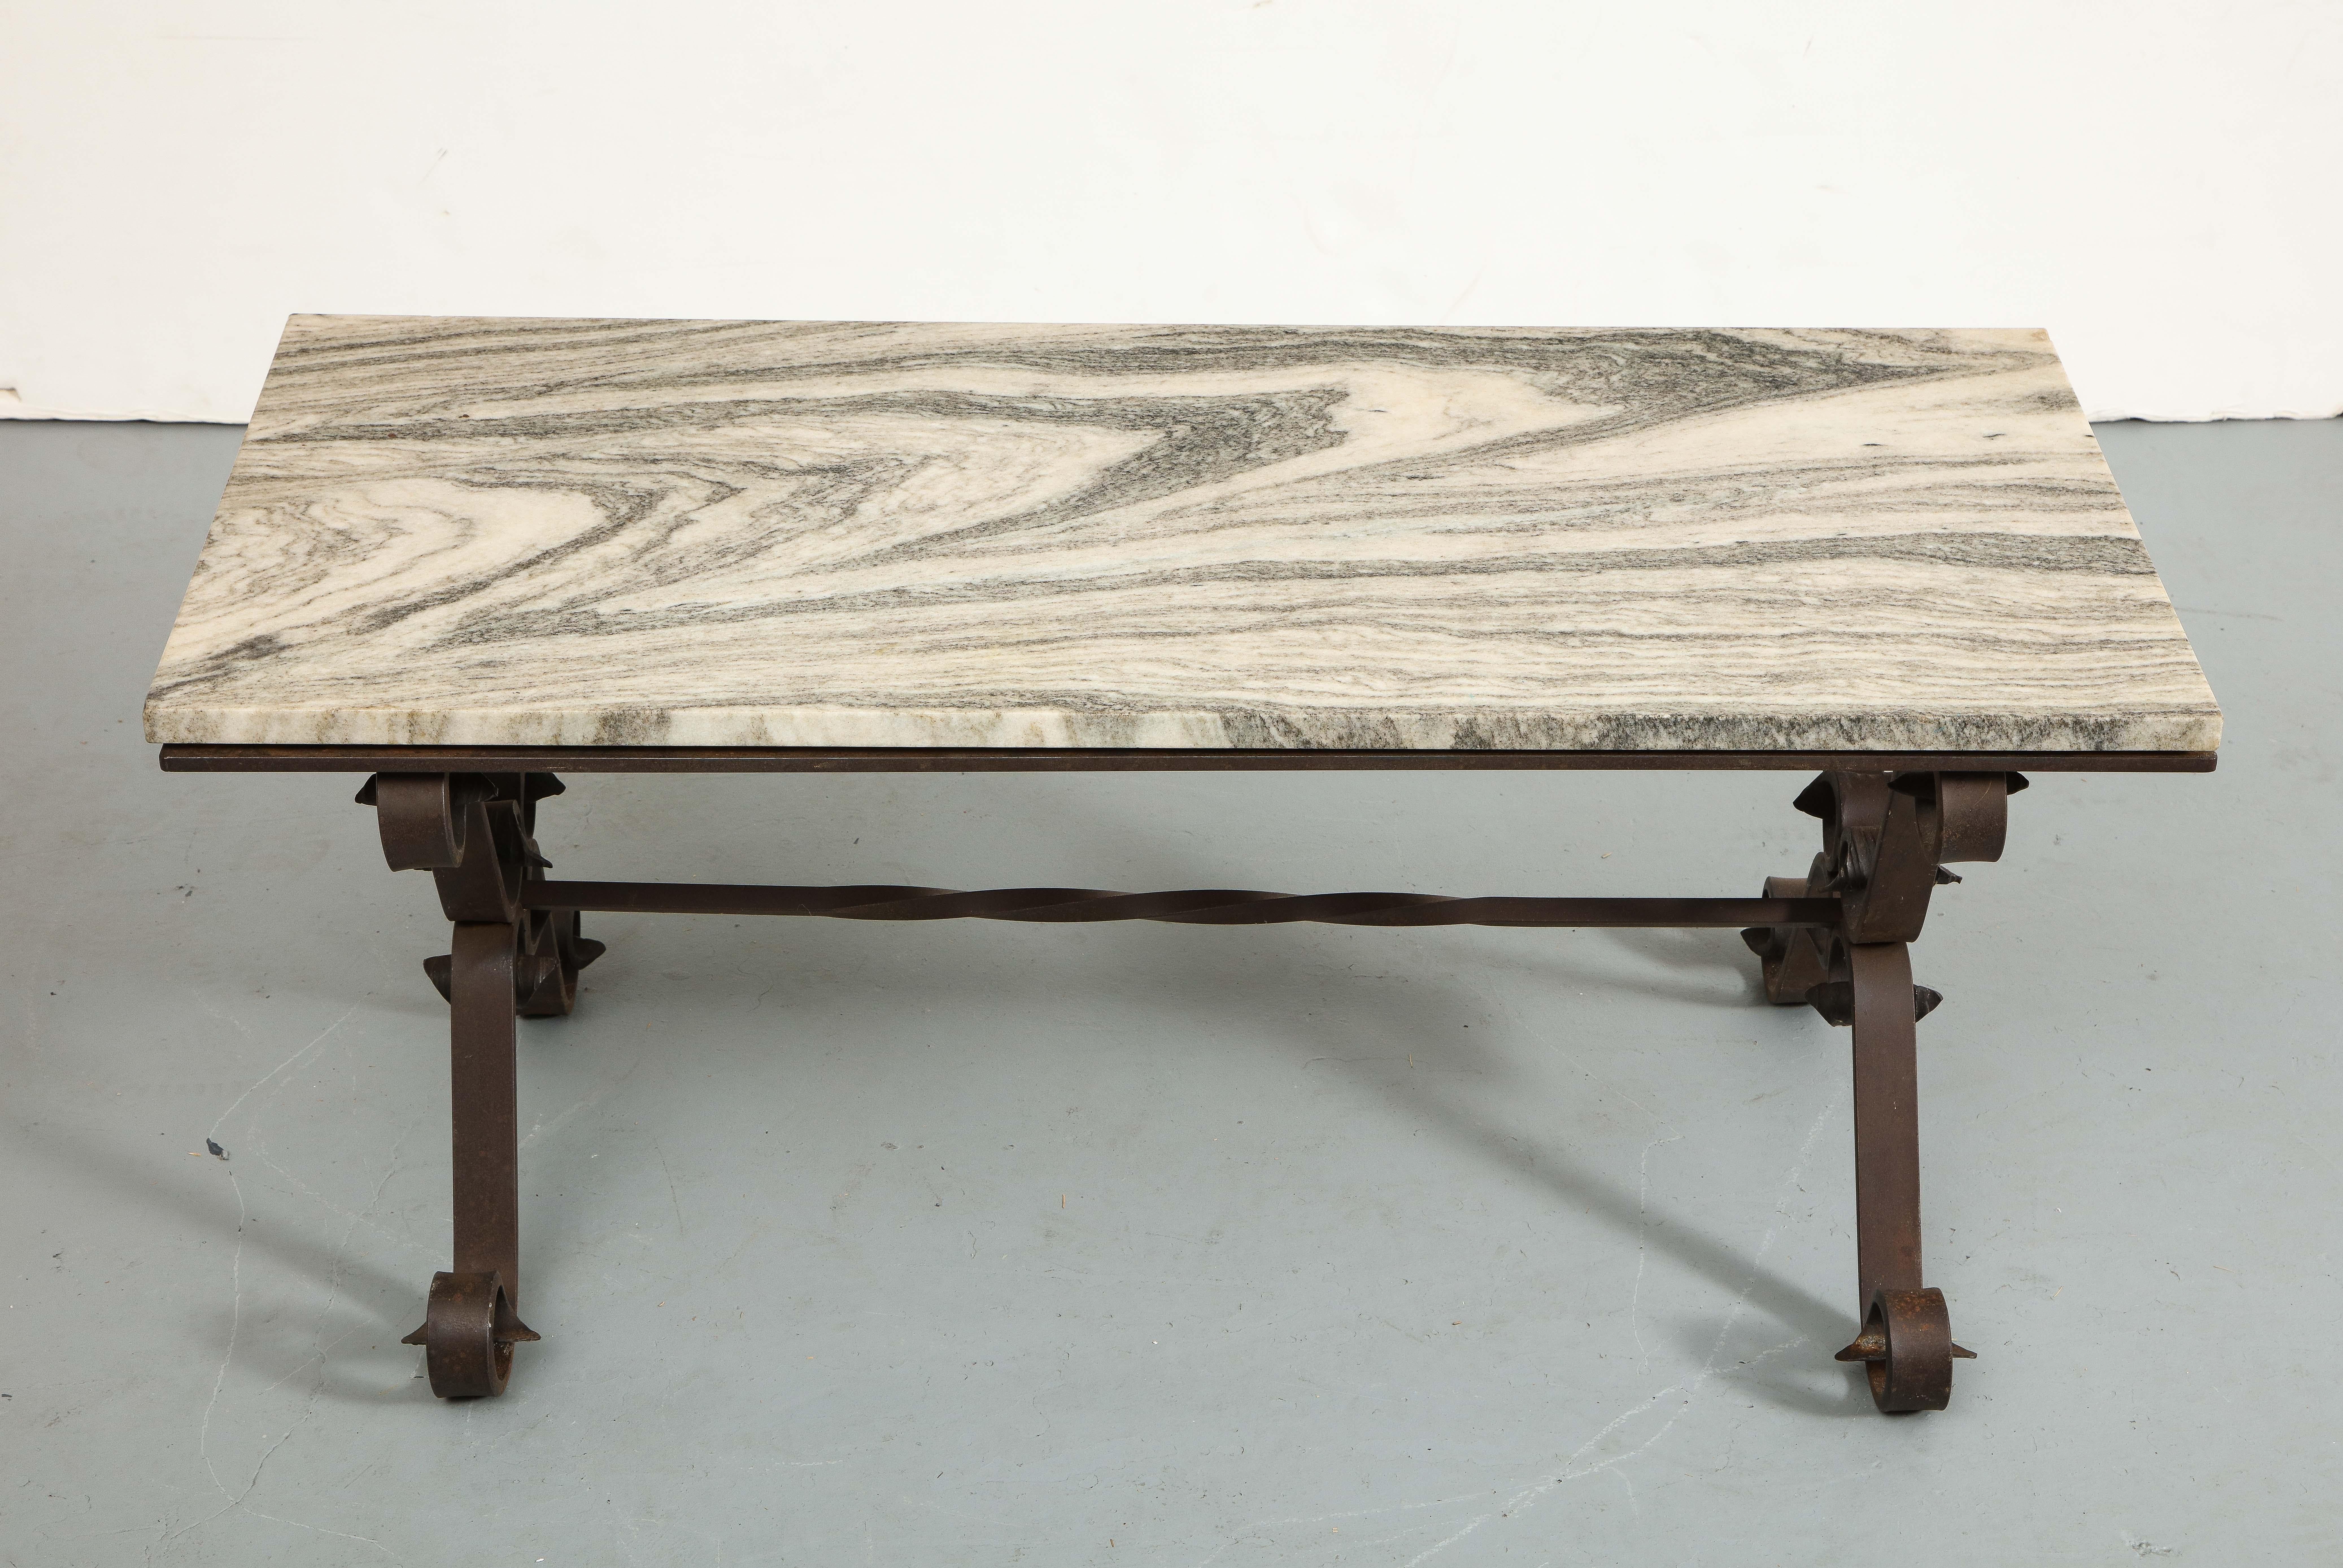 Midcentury Italian cocktail table with a cast iron base, curving scroll feet, and rectangular marble top.